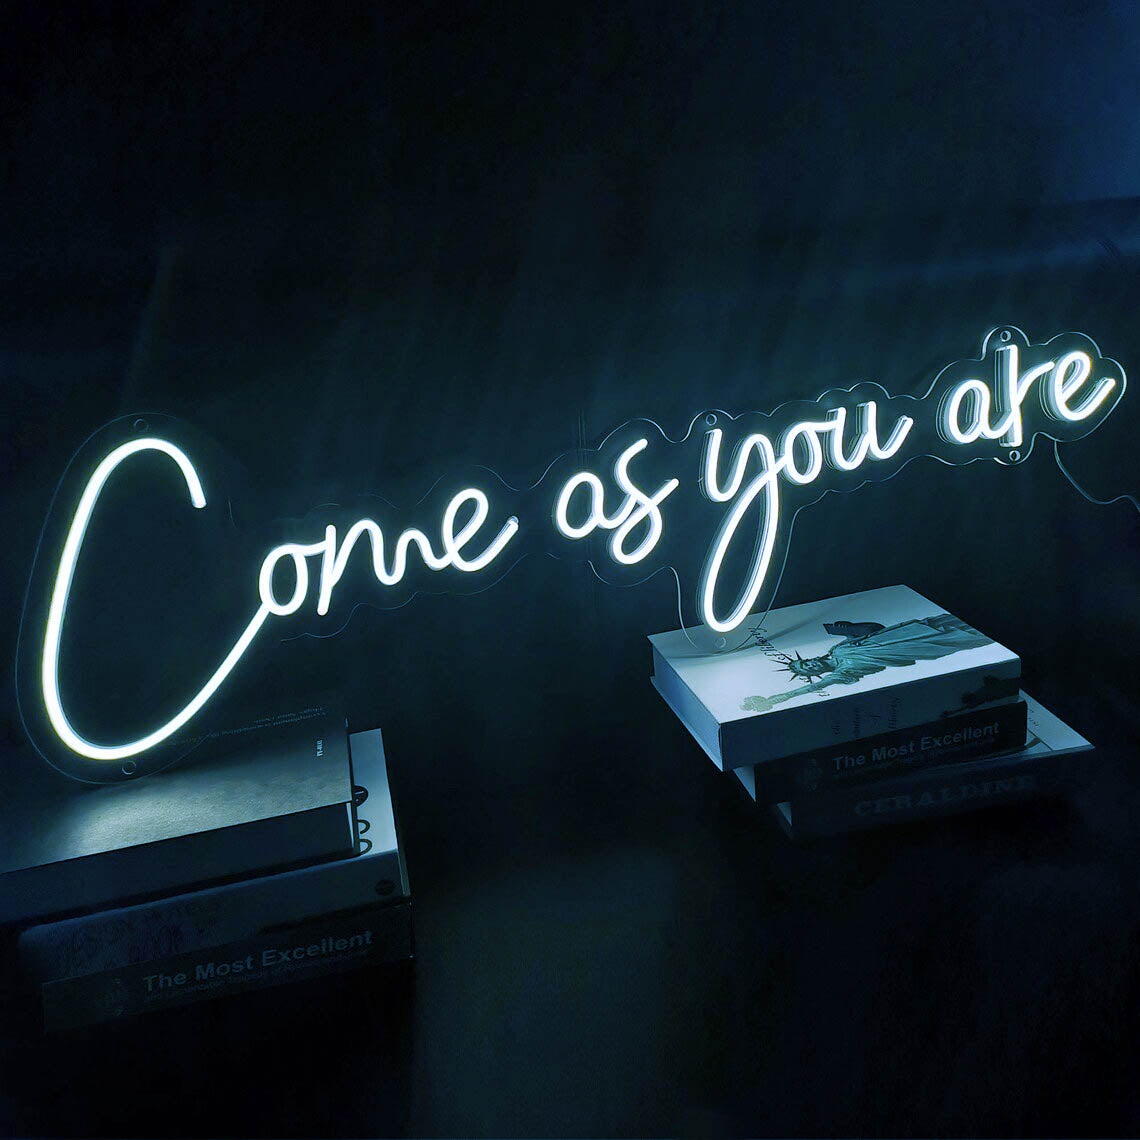 Come As You Are Led Neon Sign Neon Light